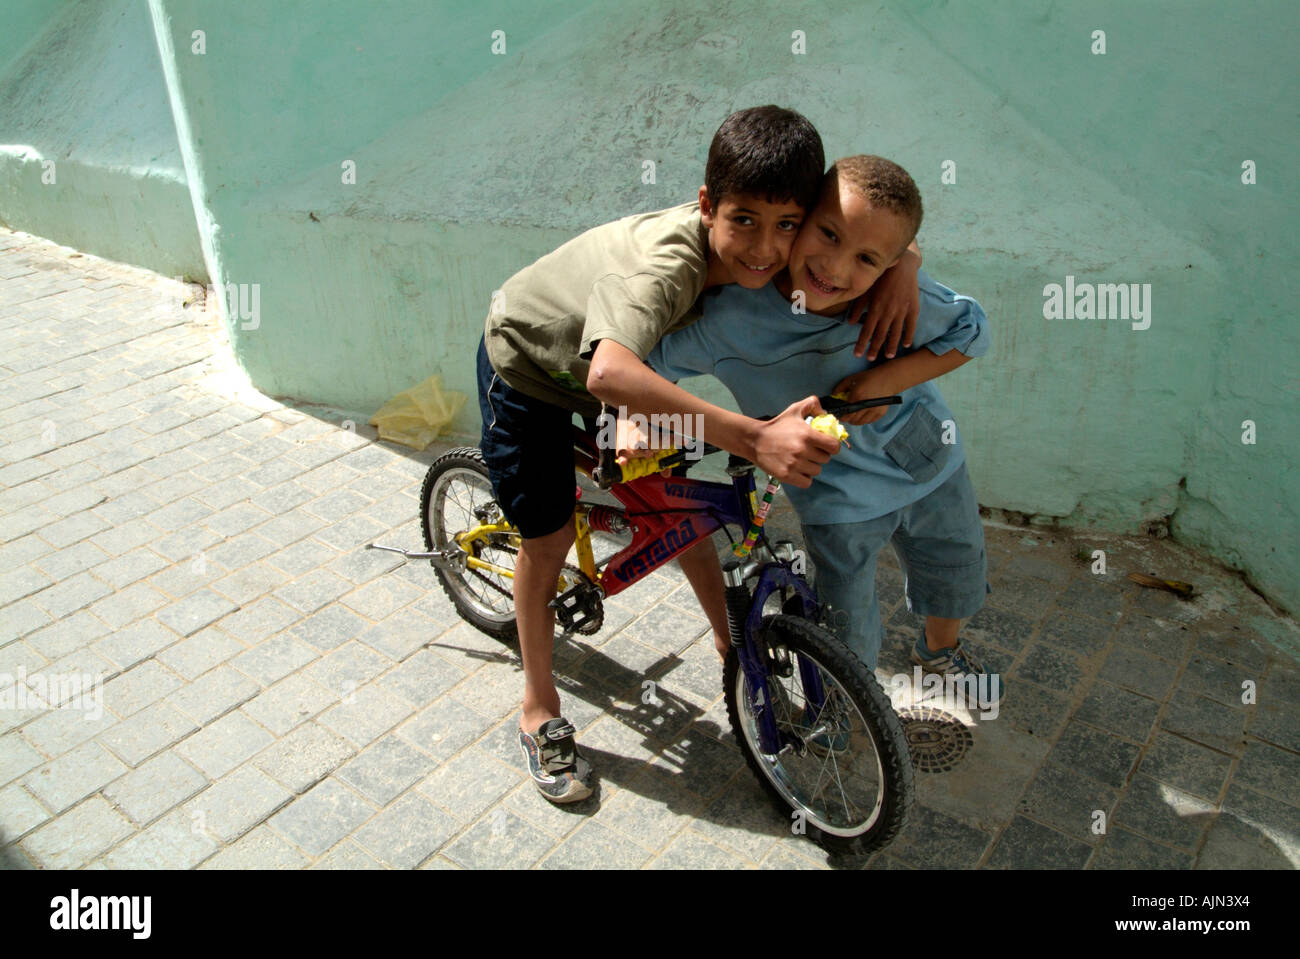 A young boy on a bike is embracing his friend and both are smiling at the camera. Stock Photo